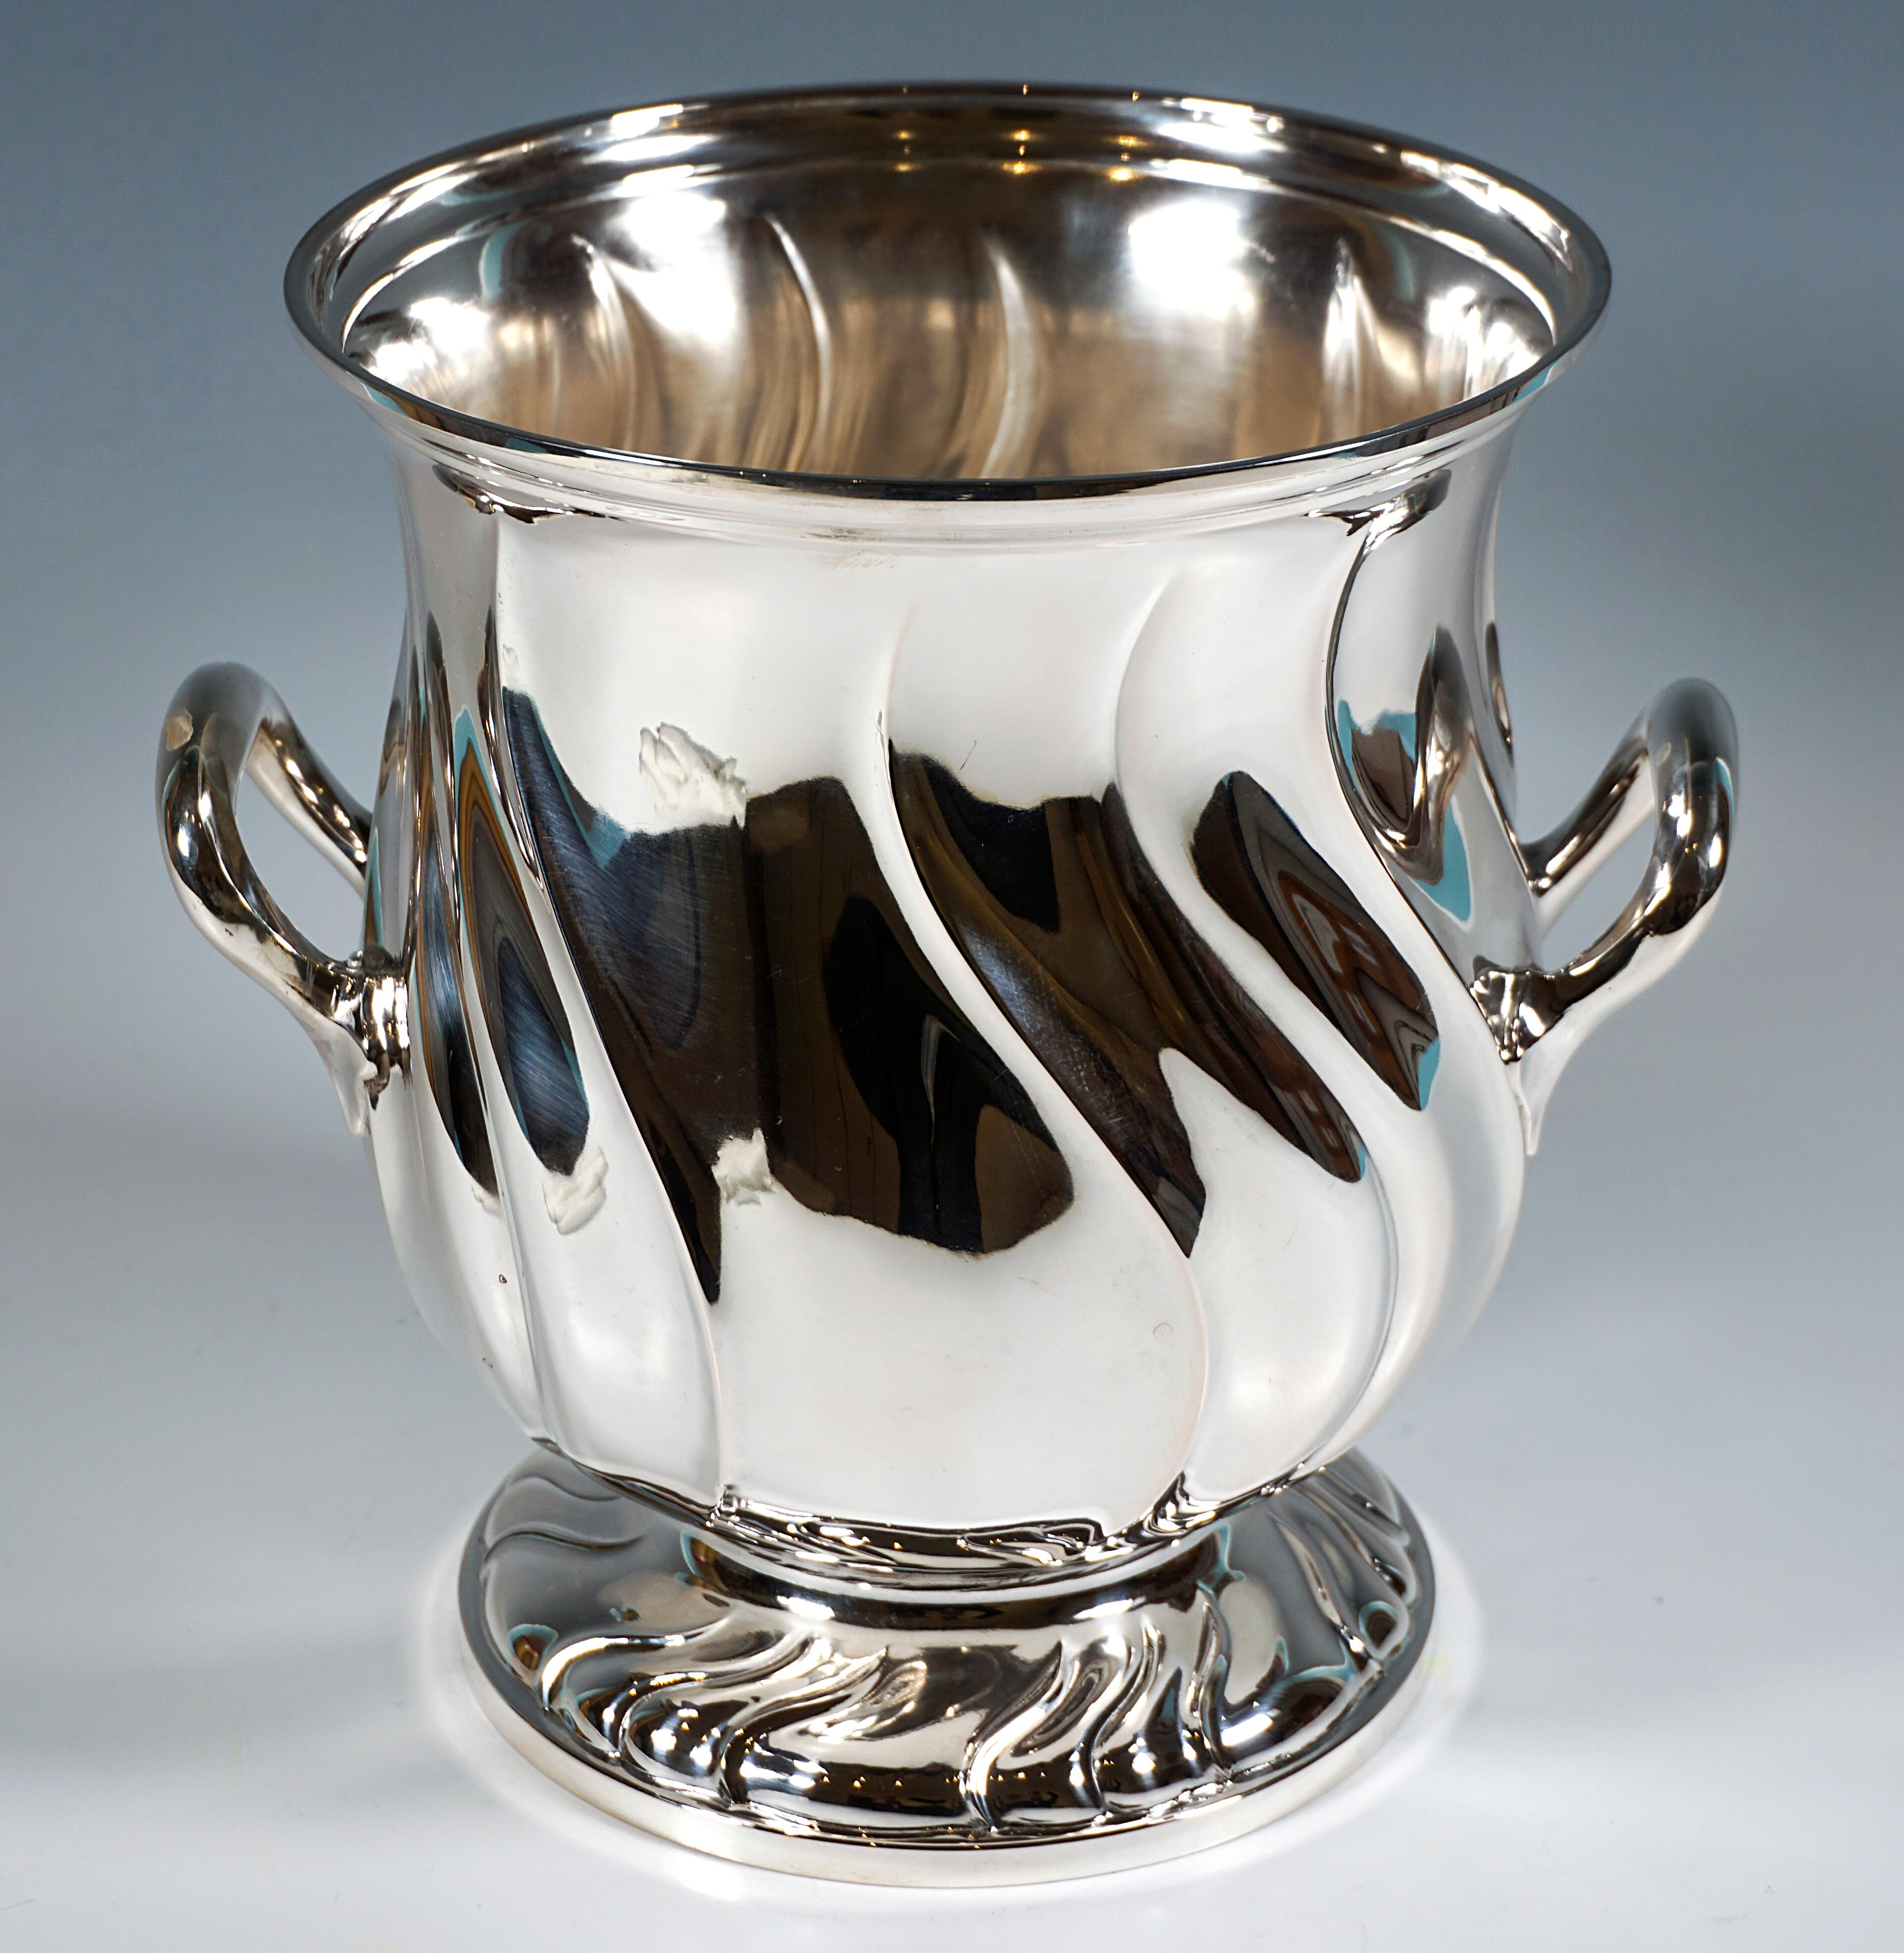 Rococo Revival Silver Champagne Cooler In Tulip Shape, Wilkens & Sons Germany, 1919 For Sale